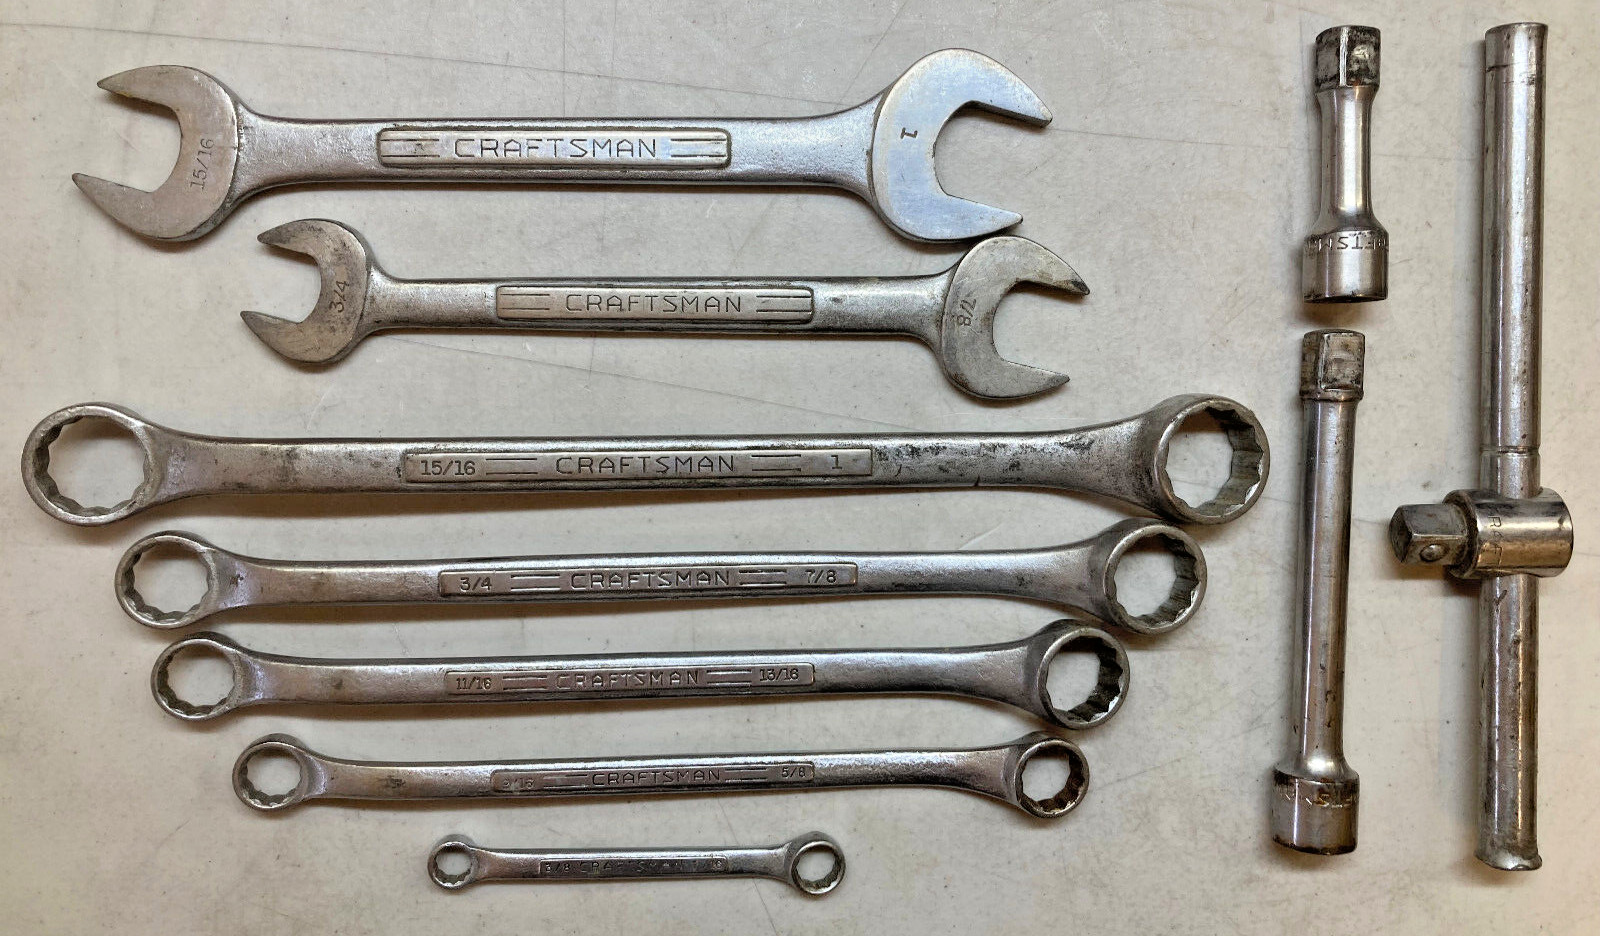 Genuine Craftsman Vintage Lot of 10 Wrenches and Extensions